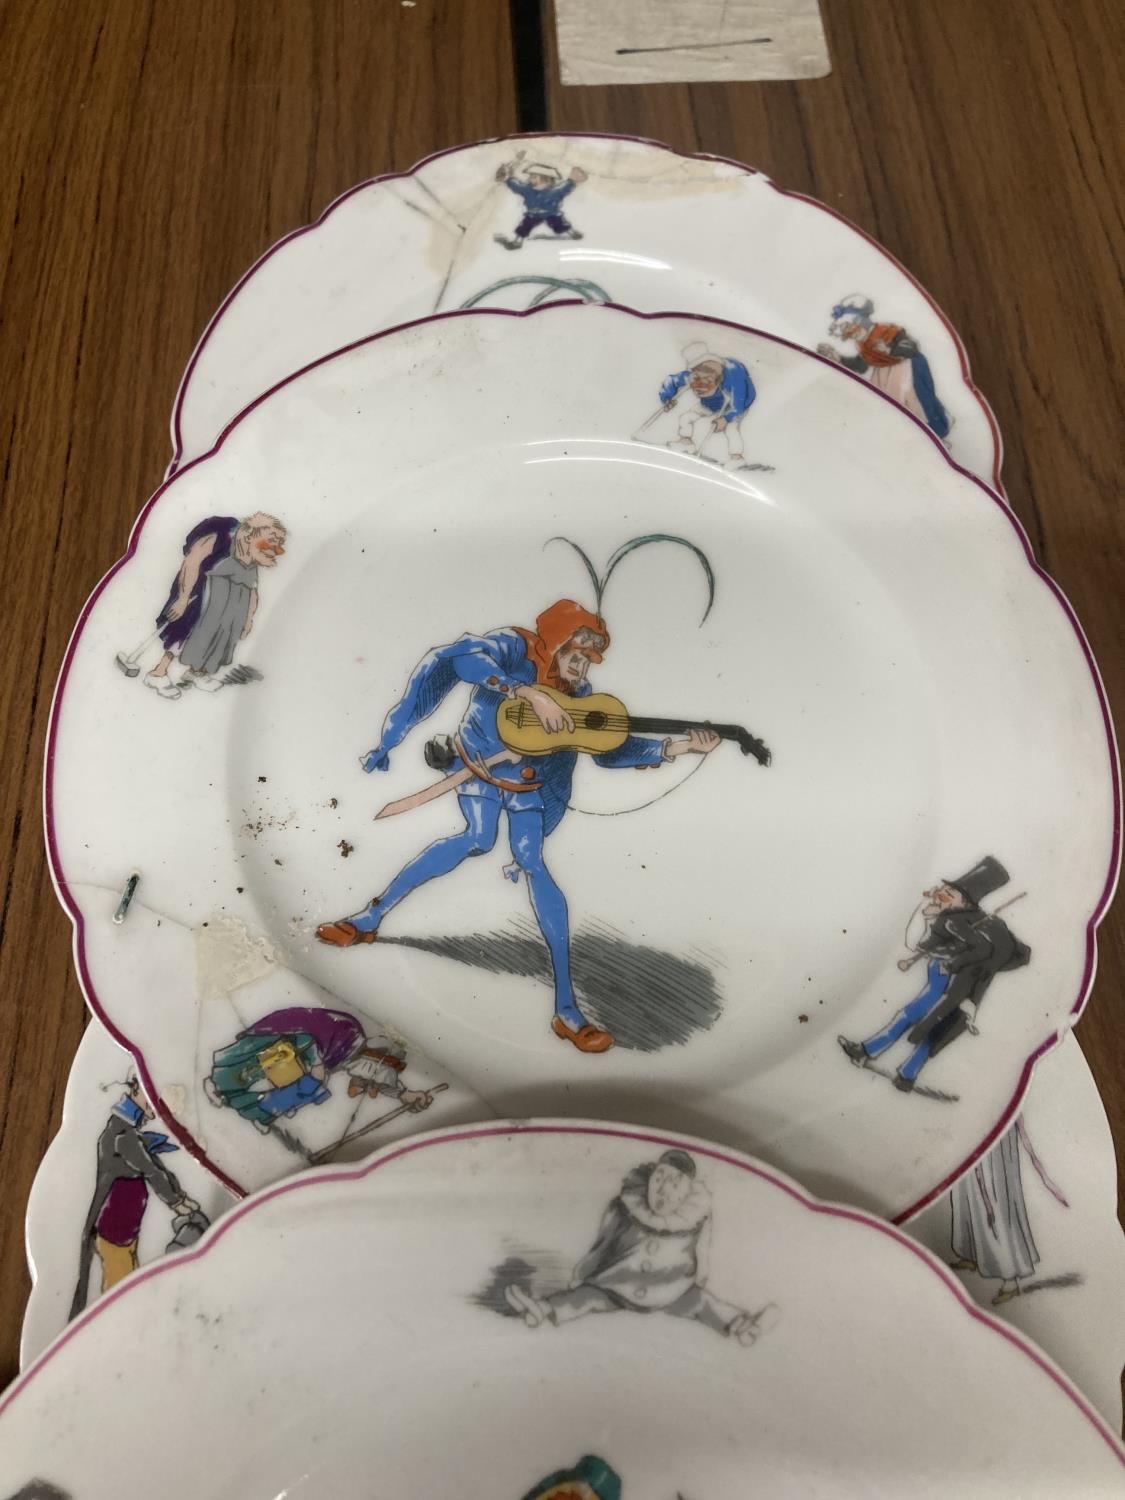 A COLLECTION OF VINTAGE PLATES WITH IMAGES OF COMICAL JESTER SCENES - Image 4 of 4